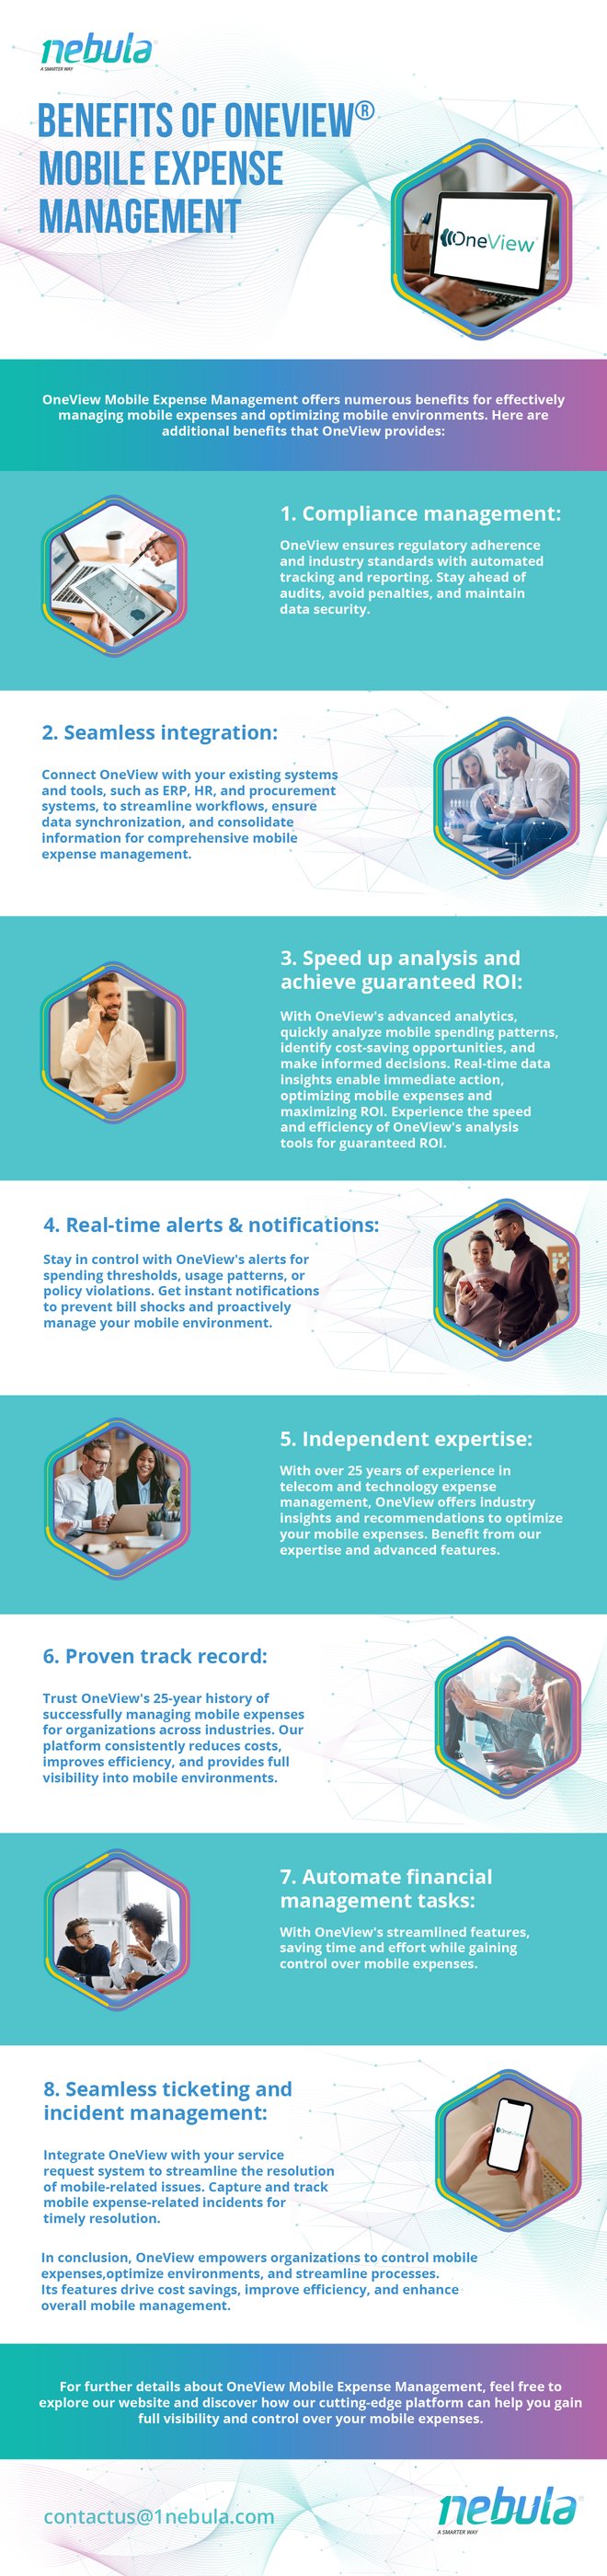 Benefits of OneView Infographic due 17th-01